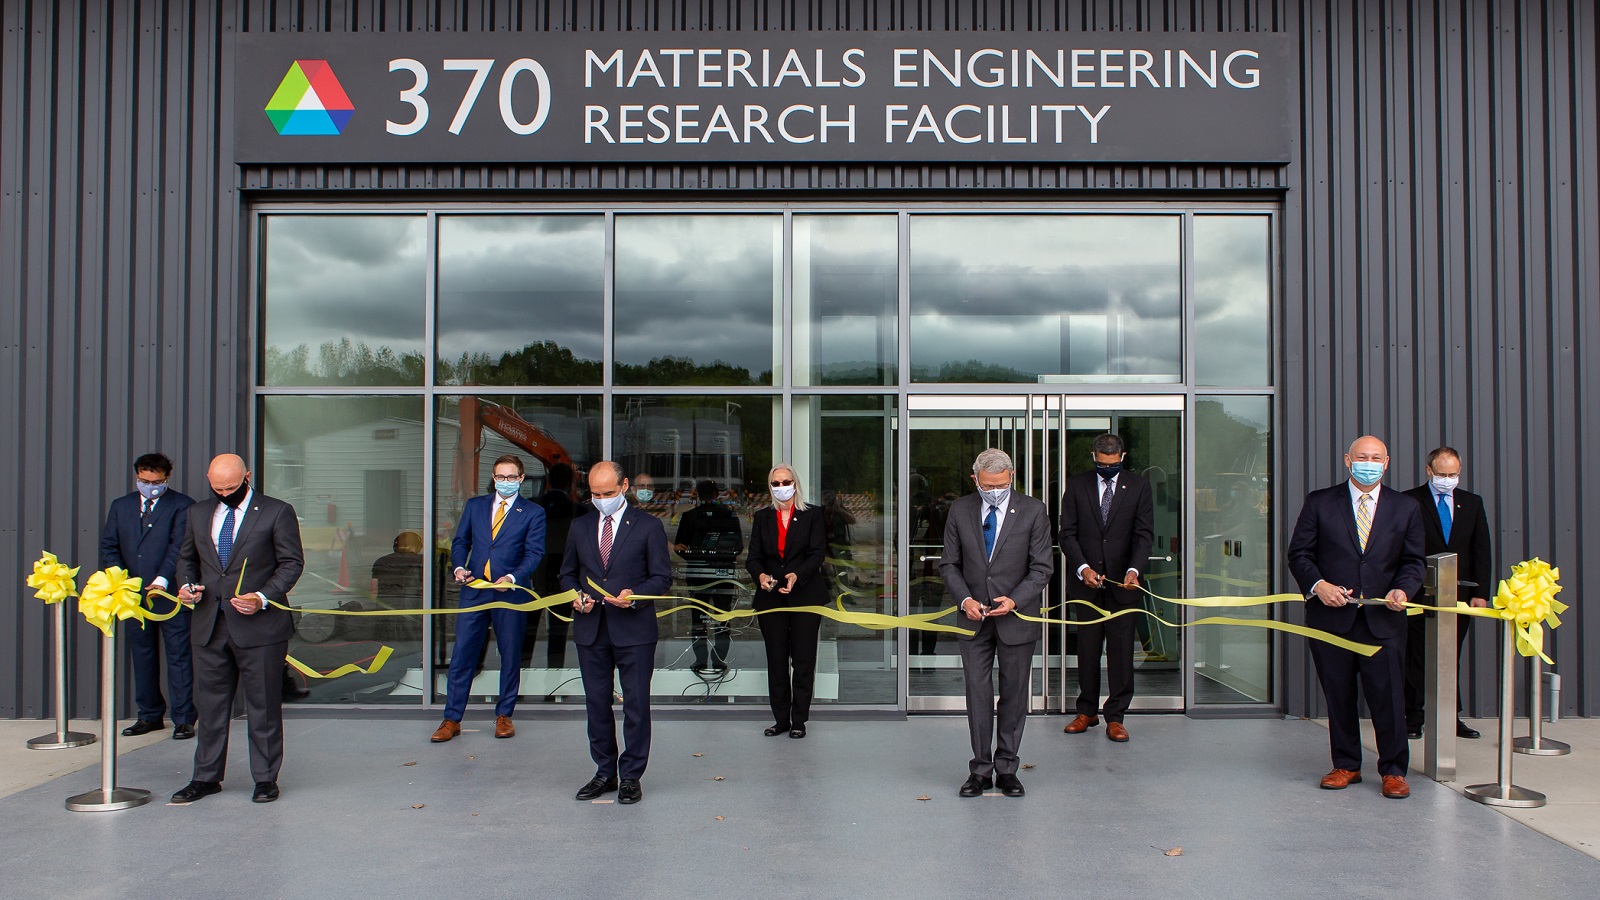 Argonne employees stand at the MERF ribbon cutting in 2020